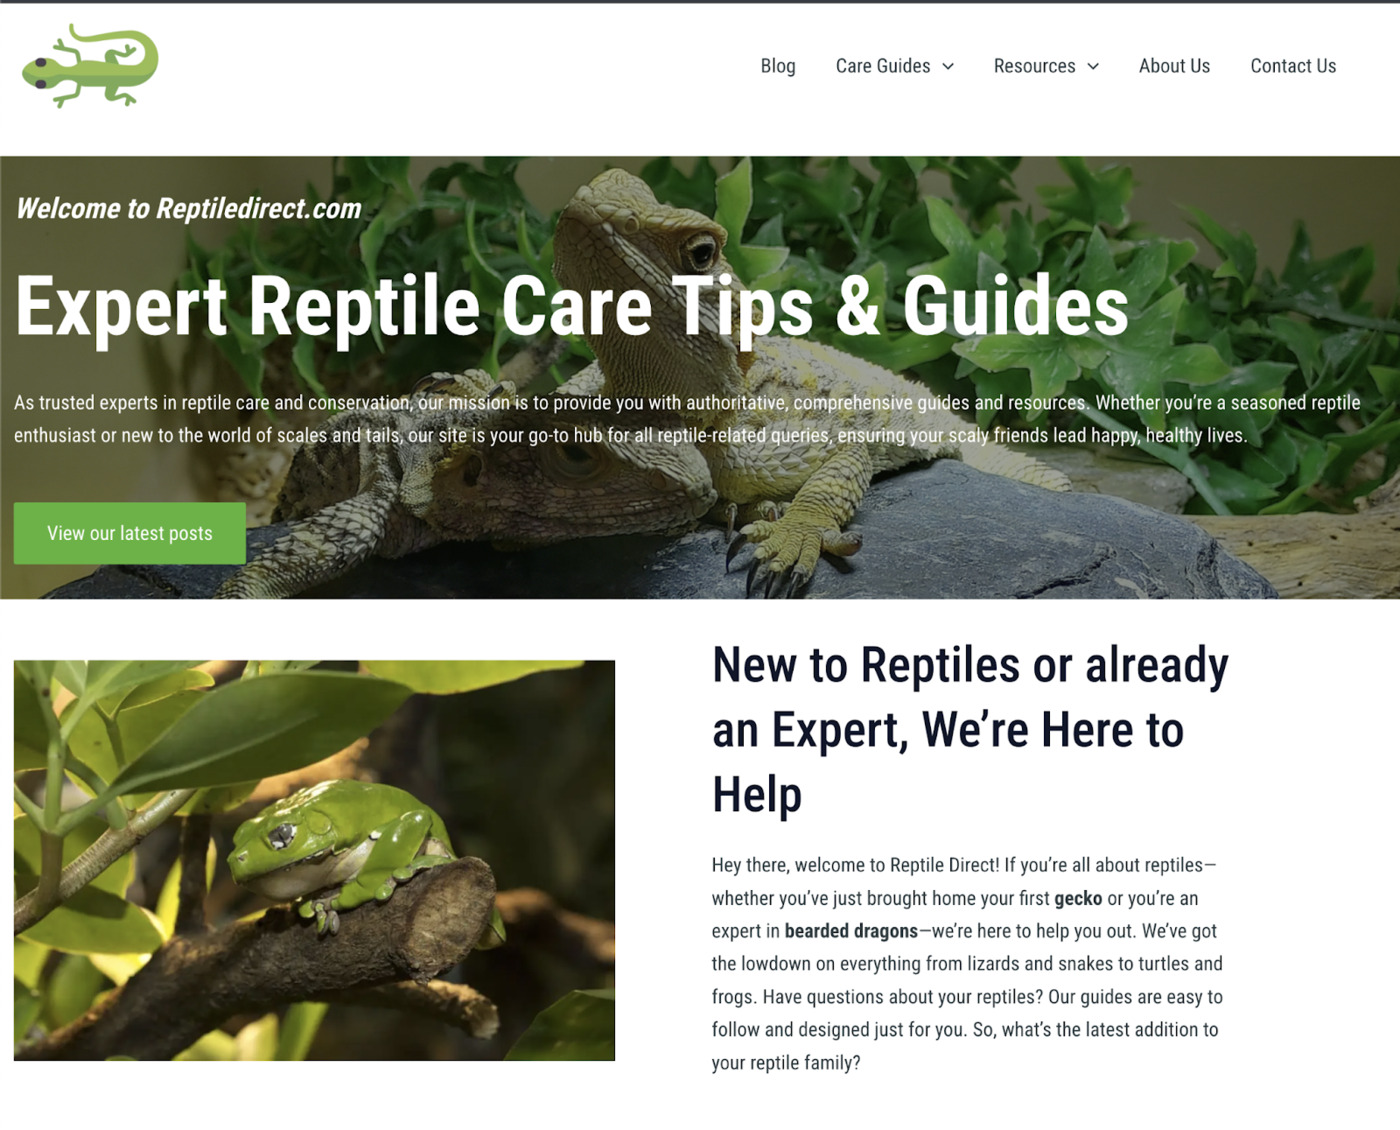 Reptile Direct is the place where reptile owners can get information and care recommendations for their animals.